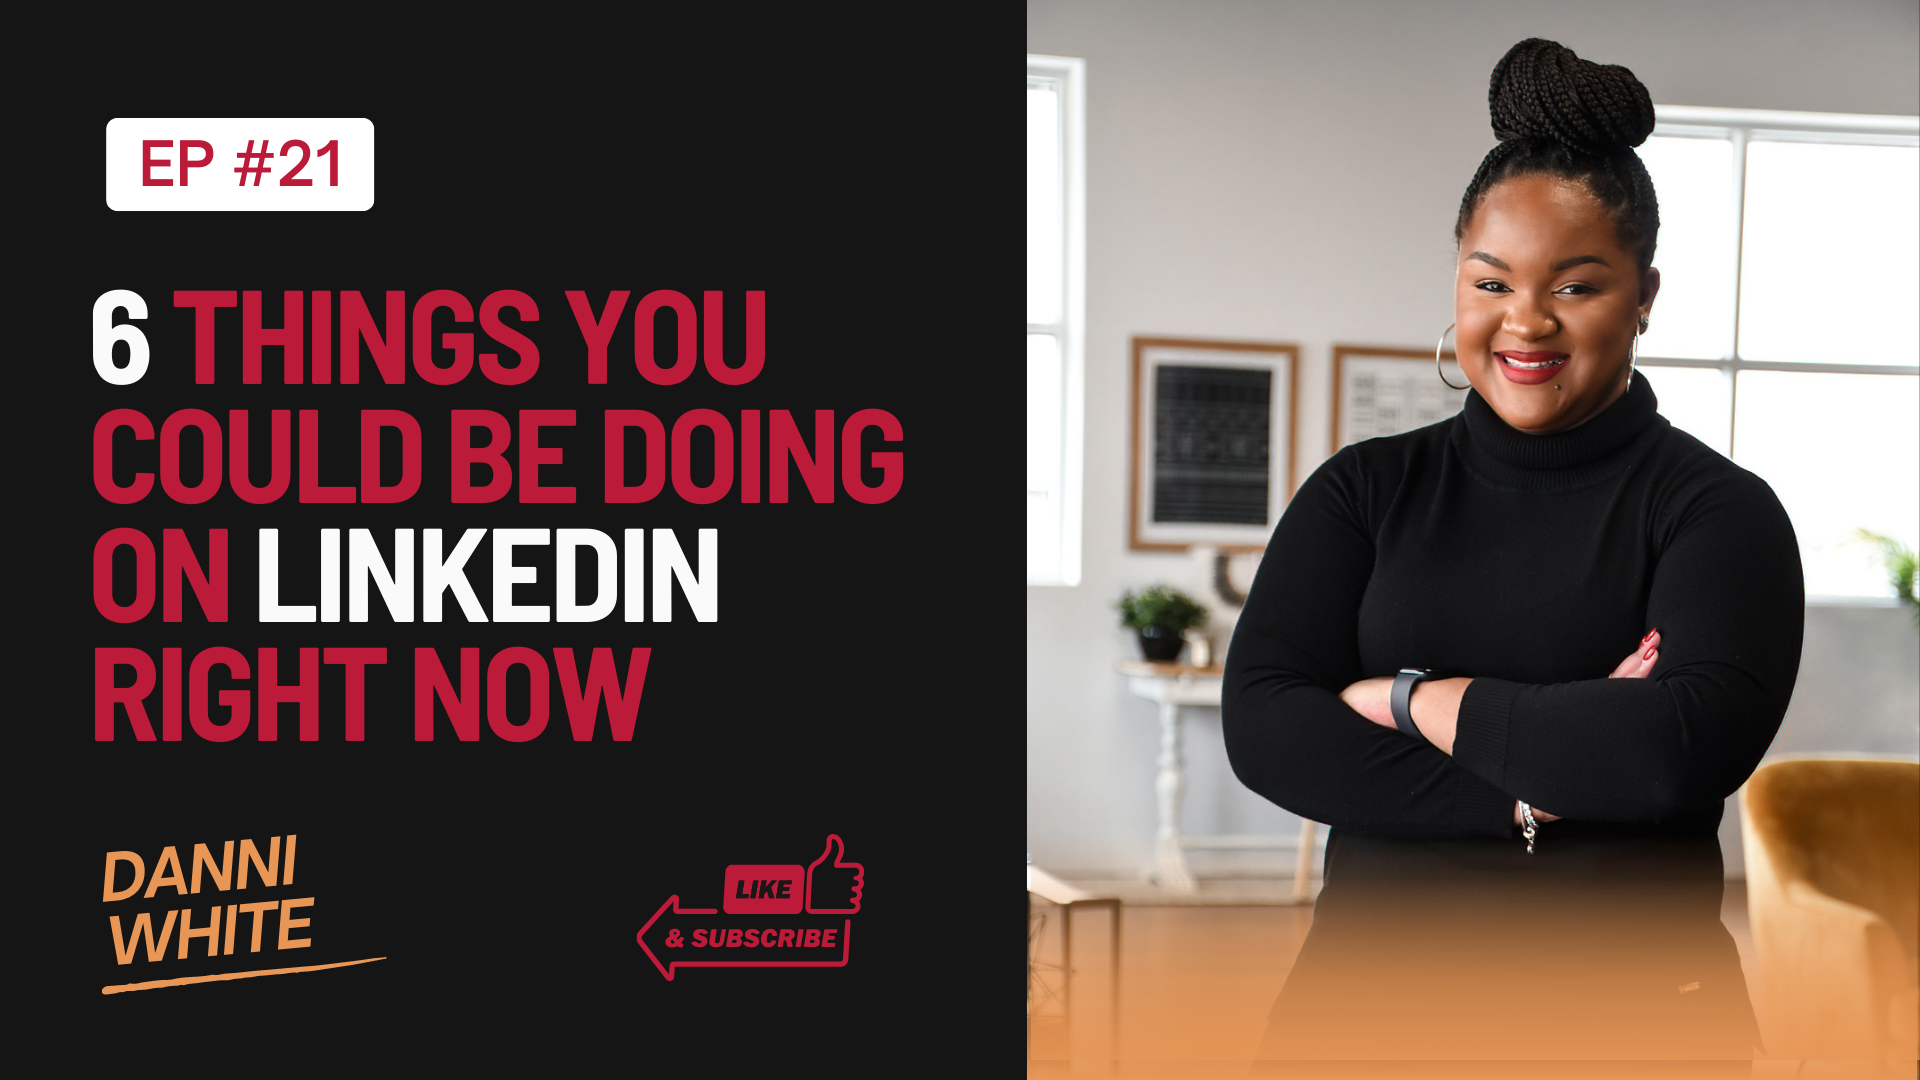 Episode 21: 6 Things You Could Be Doing on LinkedIn Right Now